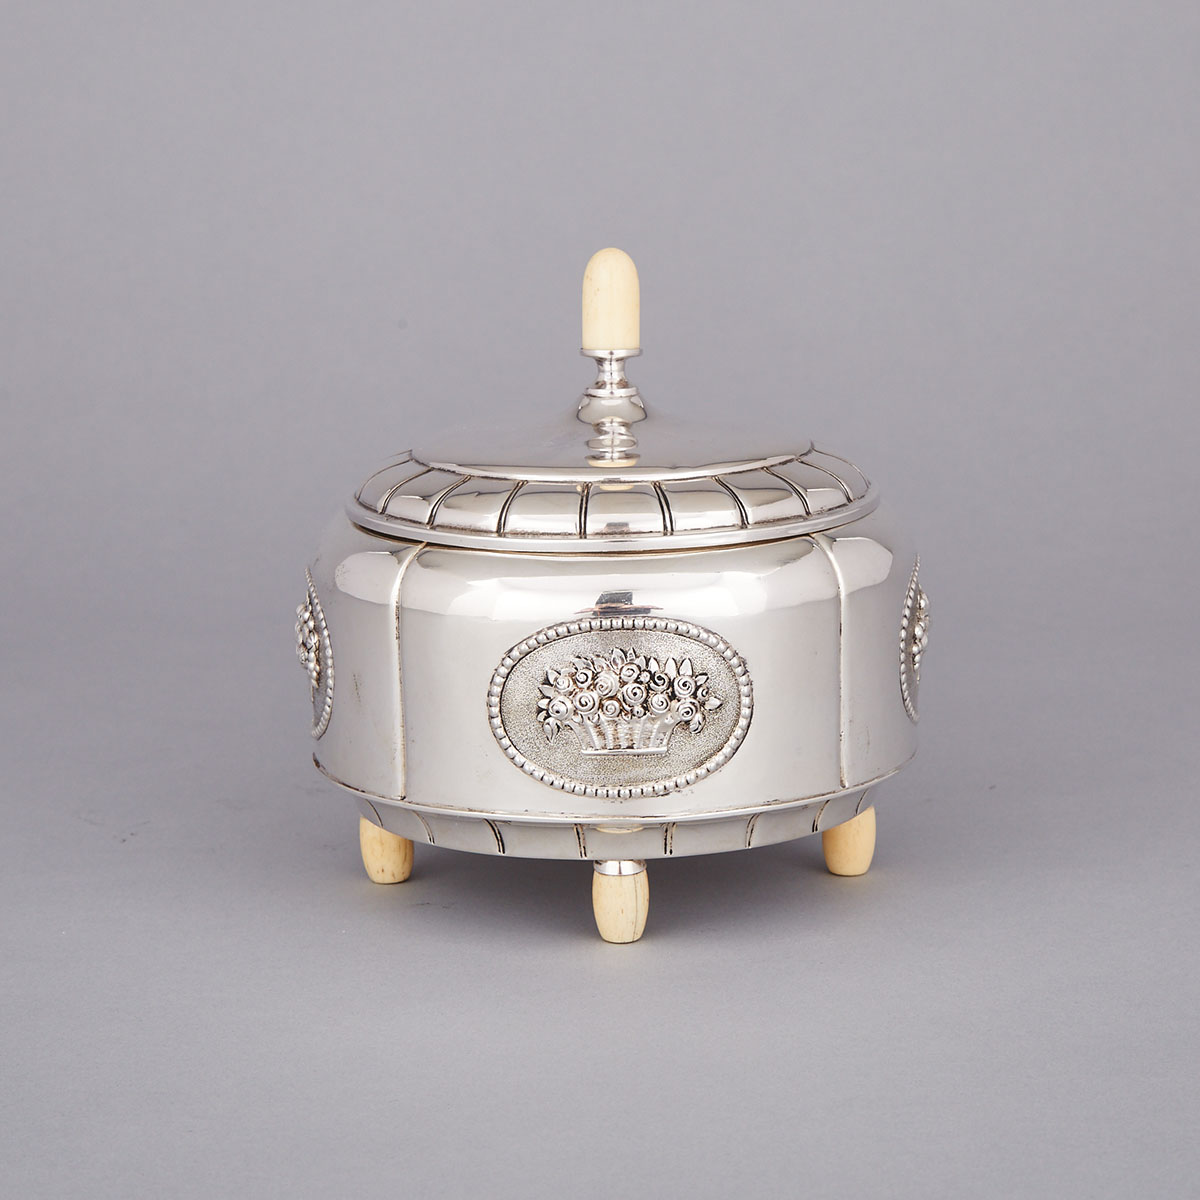 German Silver Covered Bowl with Ivory Feet and Finial, Theodore Müller, Weimar, early 20th century